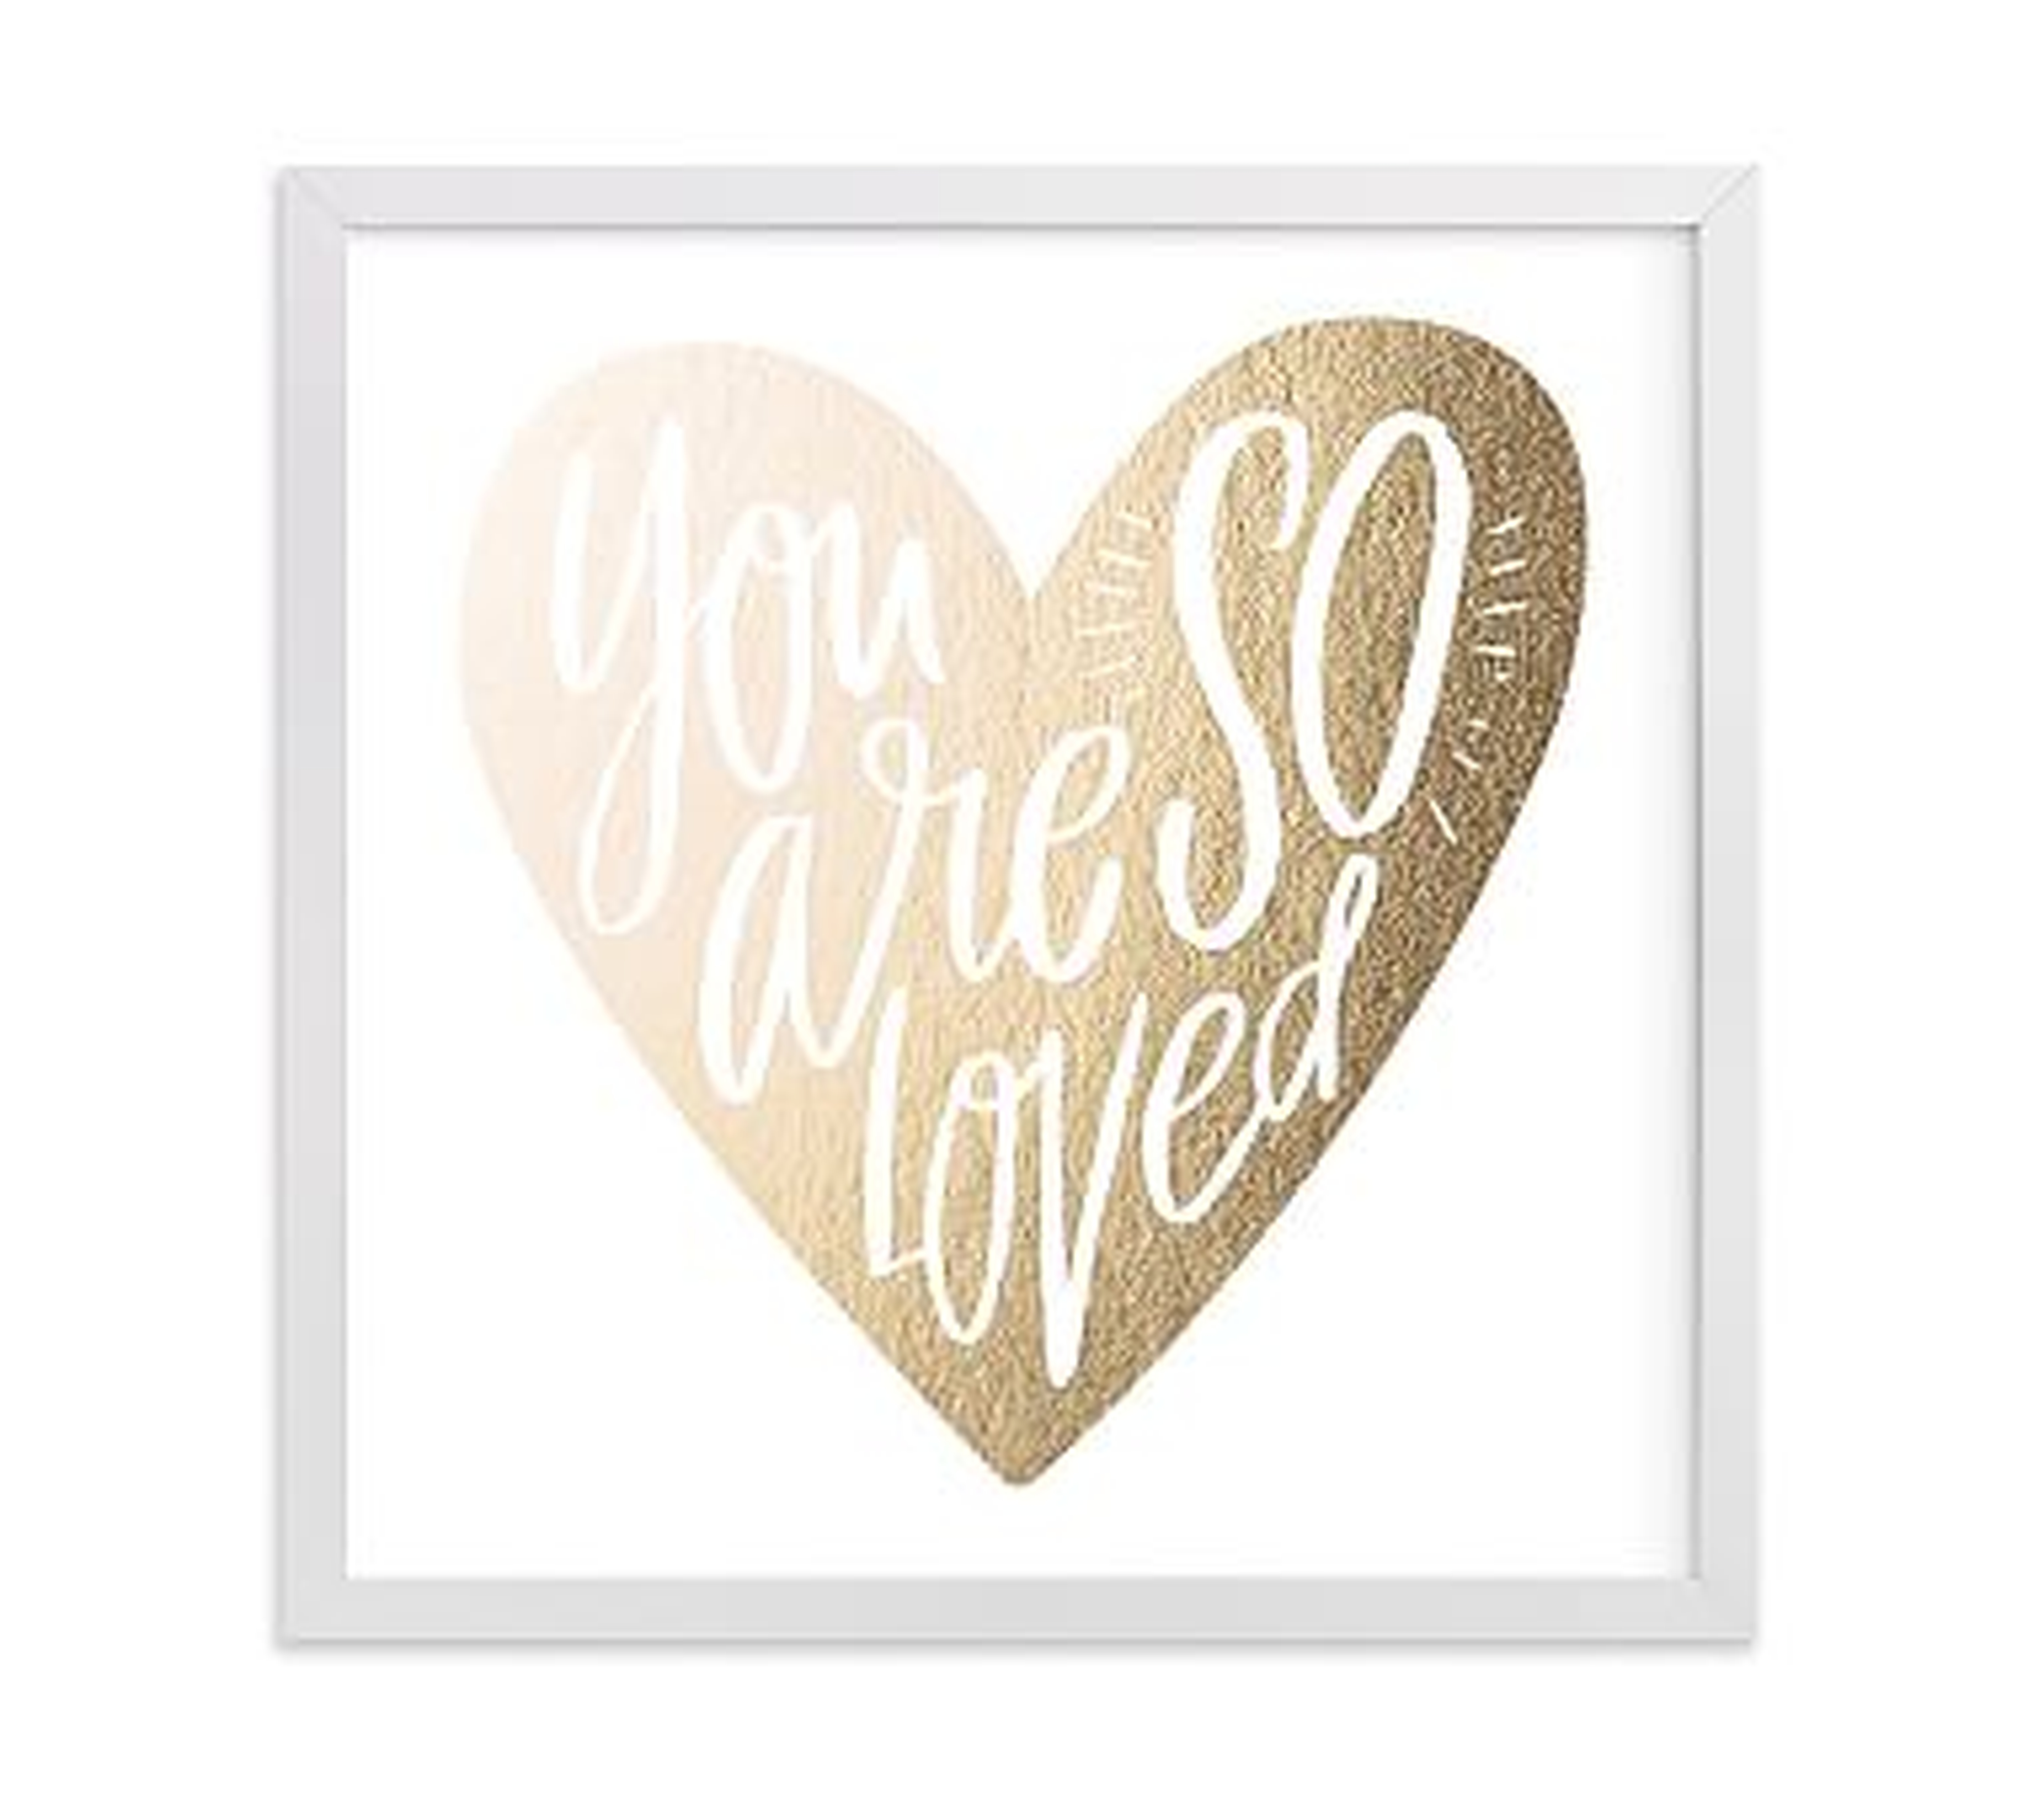 So Loved Heart Wall Art by Minted(R) 11x11, White - Pottery Barn Kids